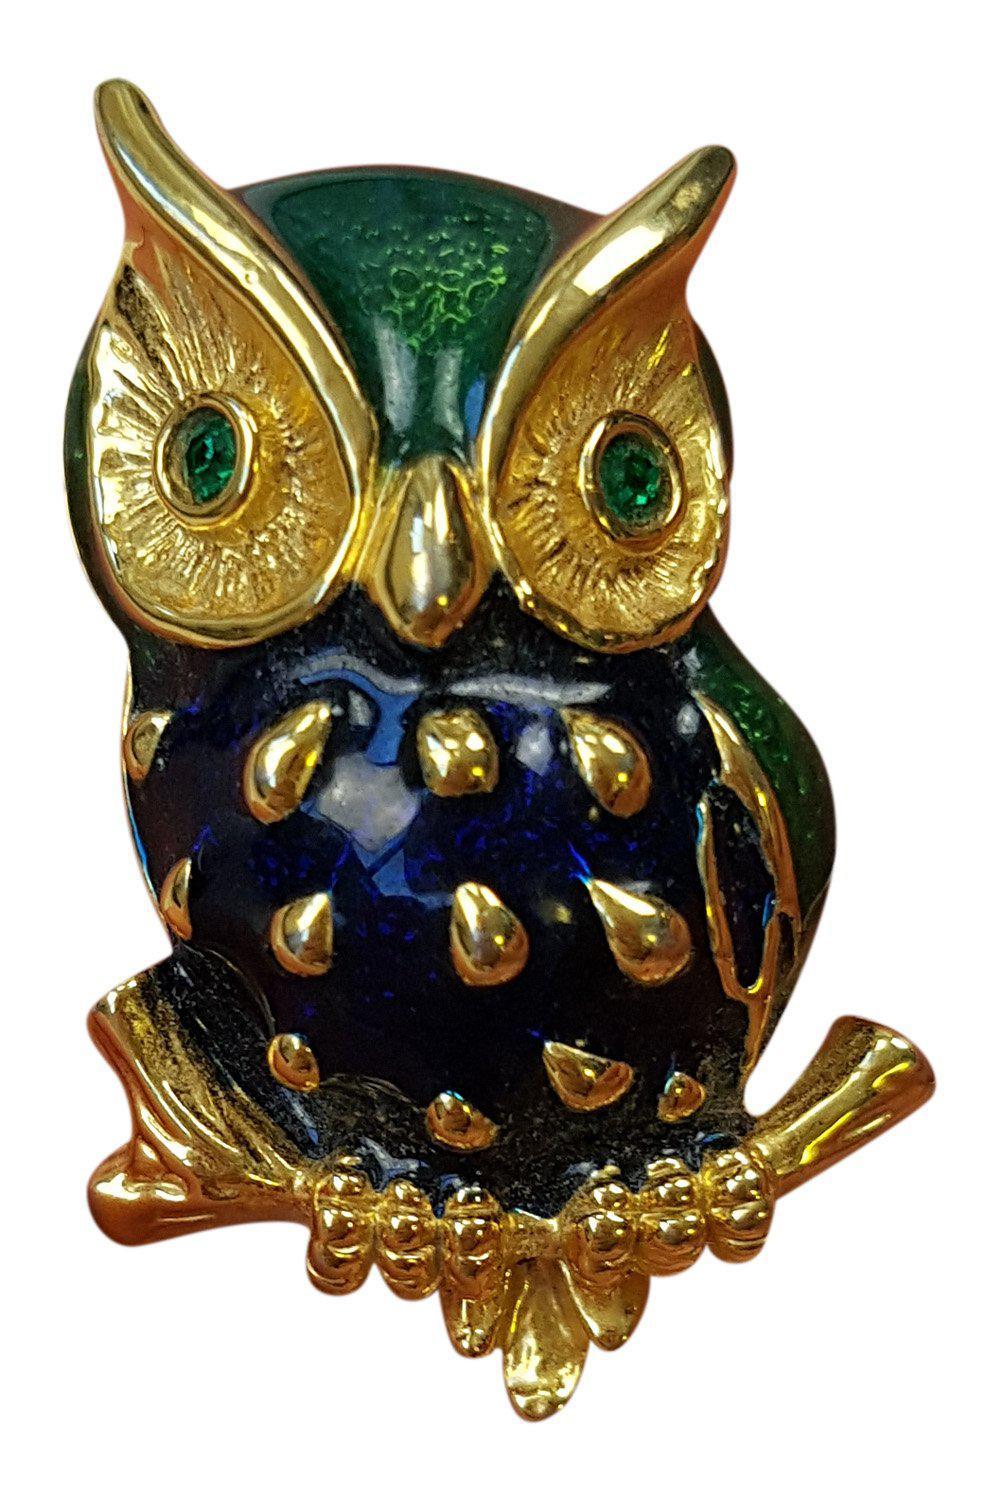 OWL BROOCH Gold Plated Enamelled Green Gem In Lay Eyes-Unbranded-The Freperie